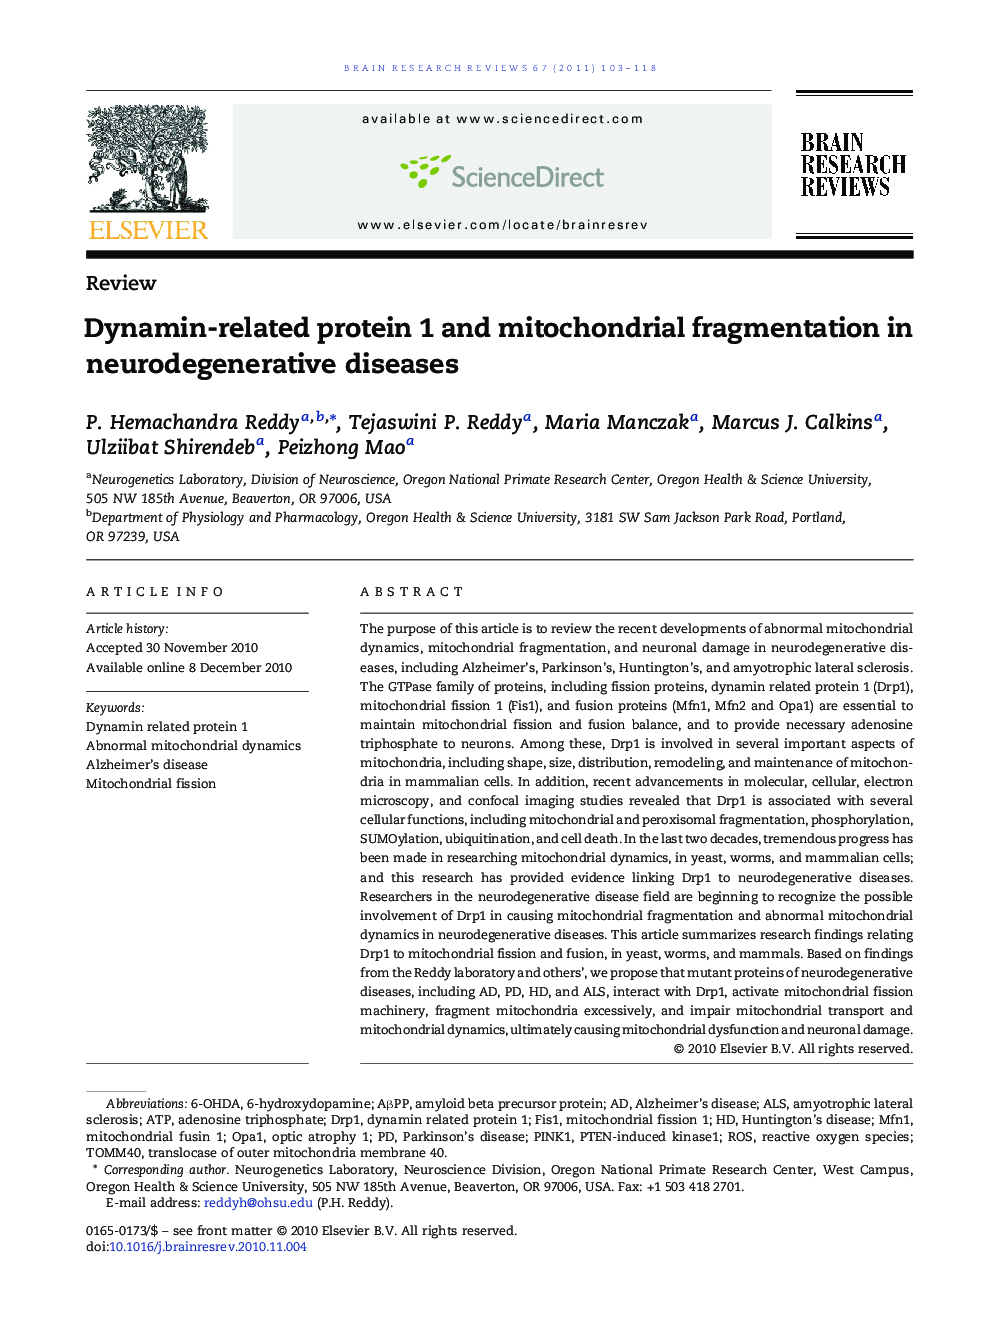 ReviewDynamin-related protein 1 and mitochondrial fragmentation in neurodegenerative diseases